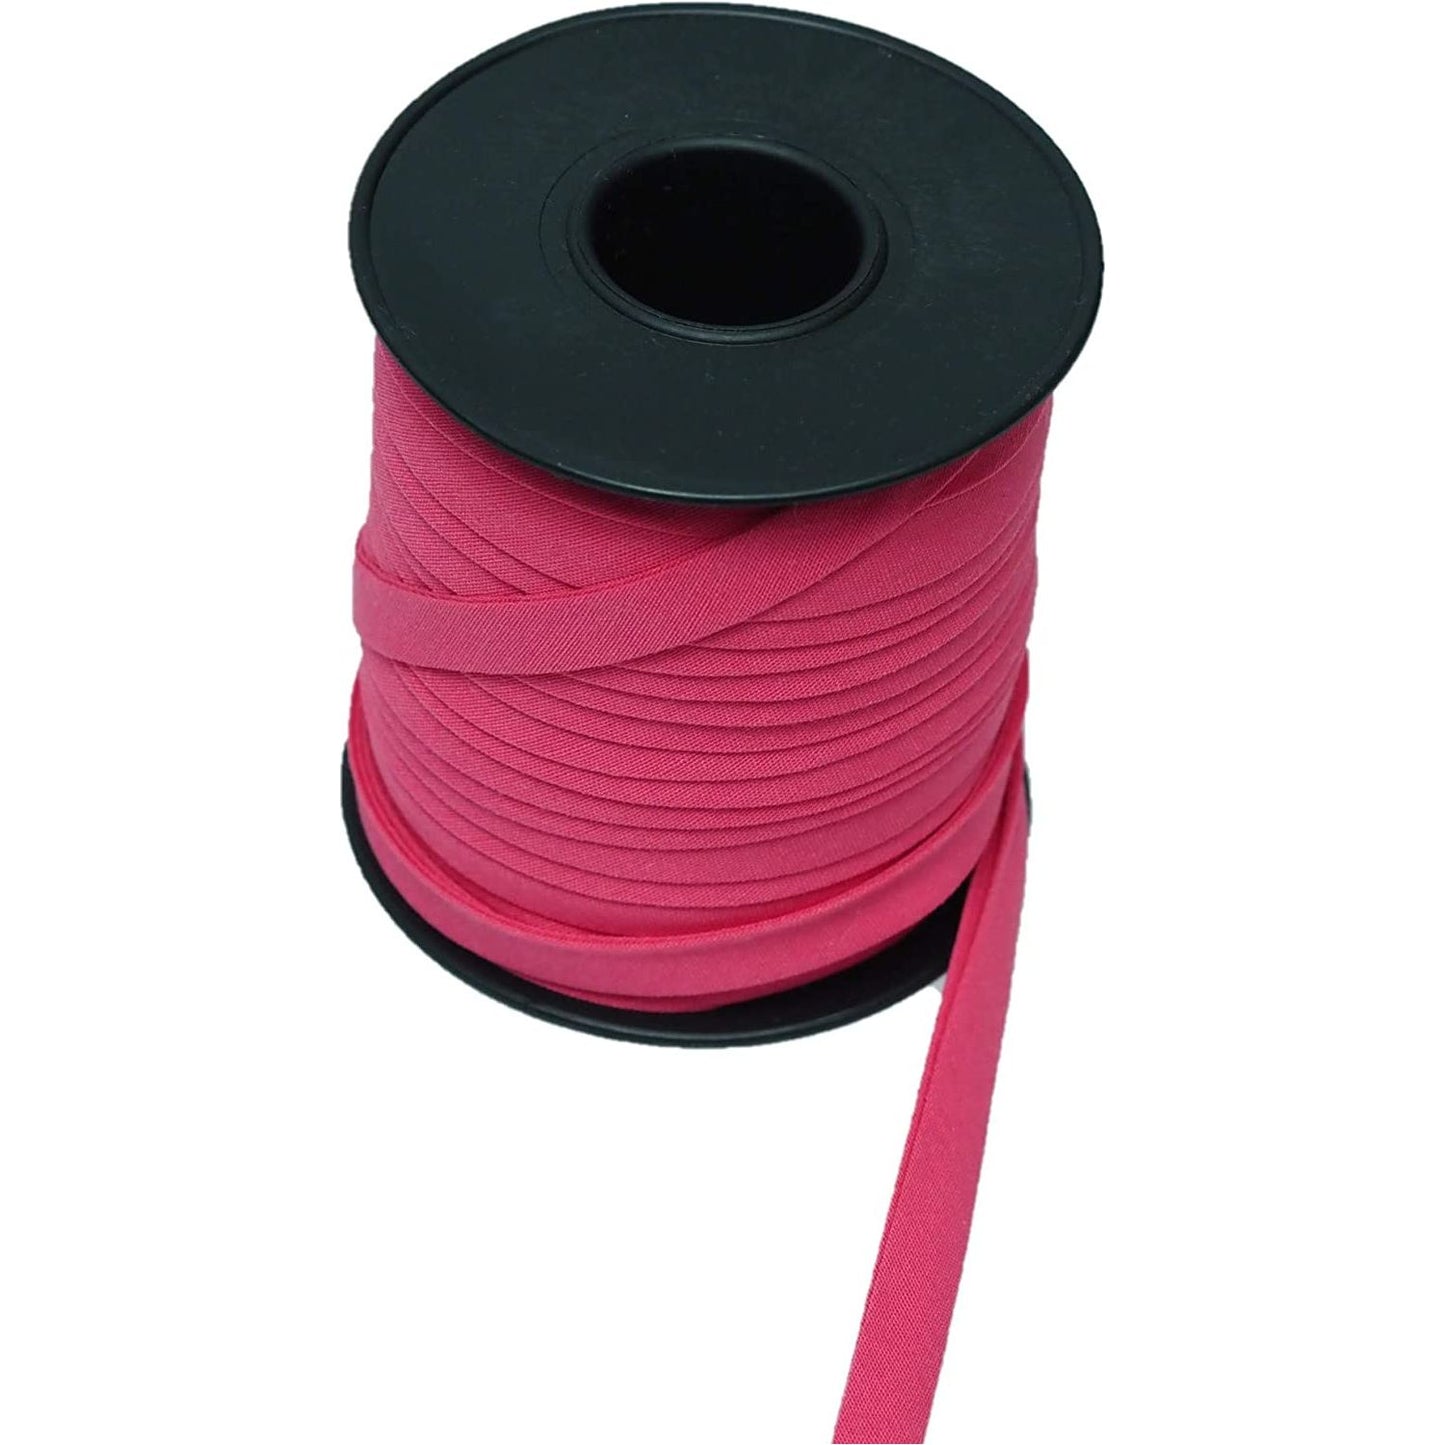 hobby trendy double fold cotton bias binding tape, for sewing, seaming, hemming, piping, quilting, 10mm- 3/8inch. continuous bulk spool of 27.30 yards - 25 meters fuschia